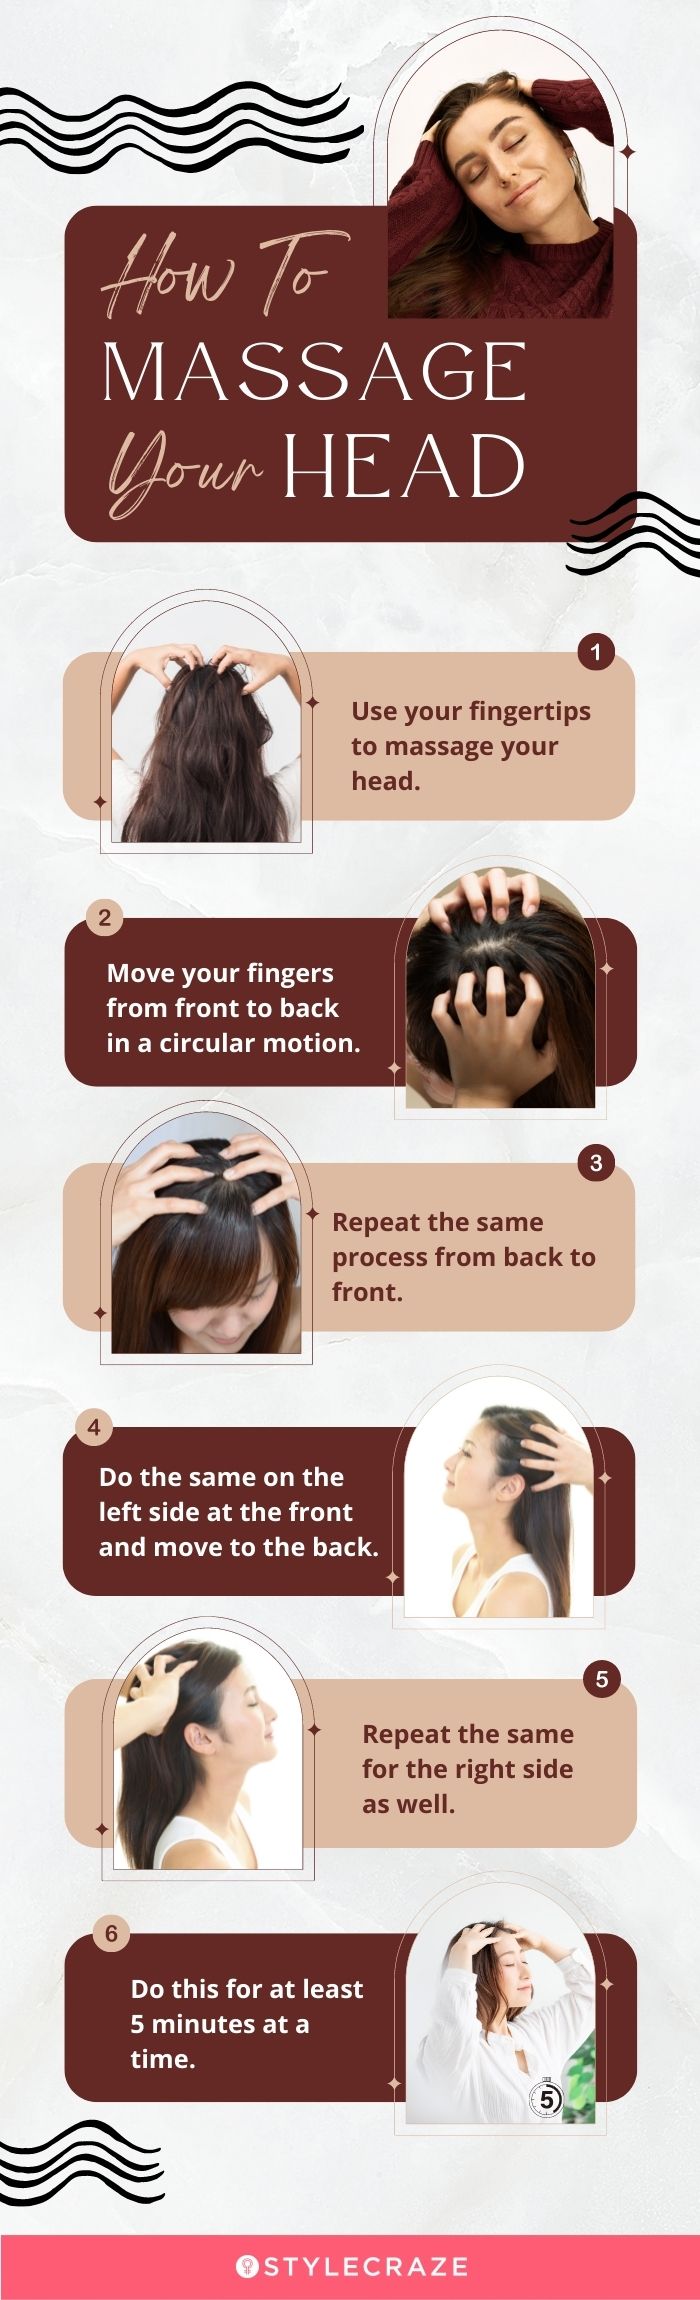 how to massage your head (infographic)